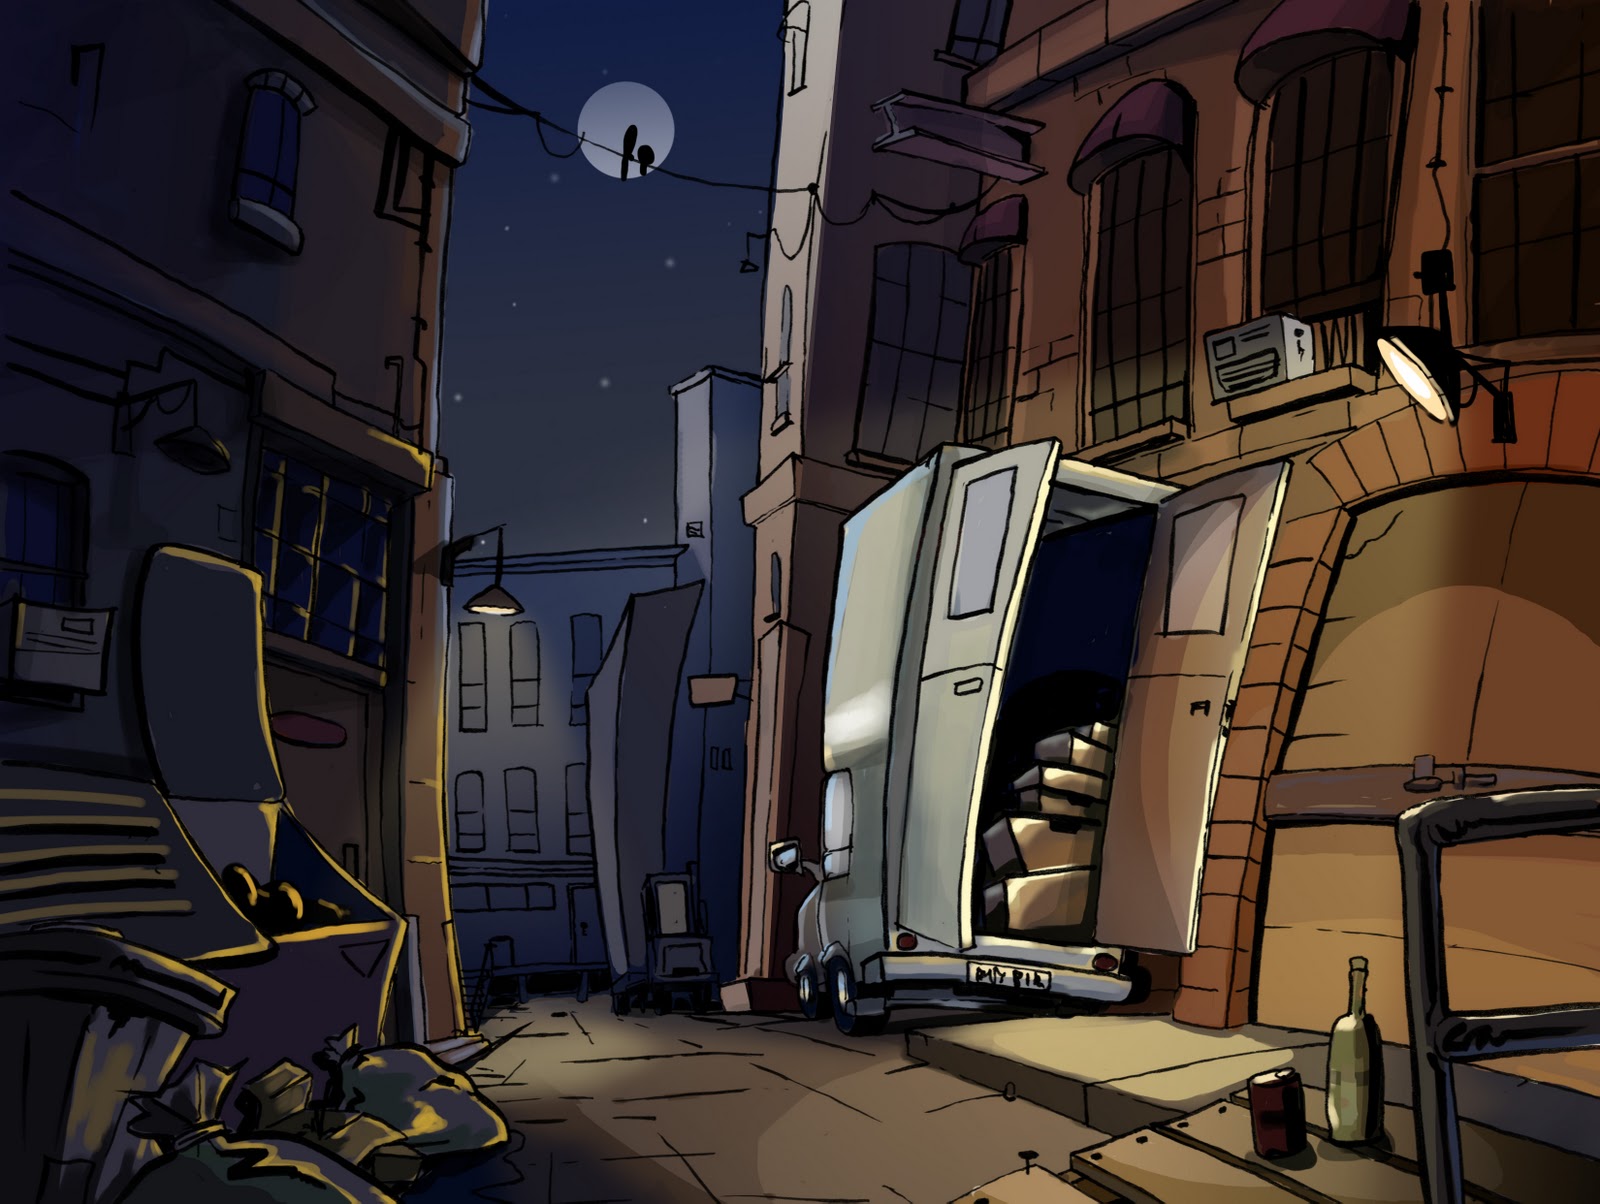 Back alley tales